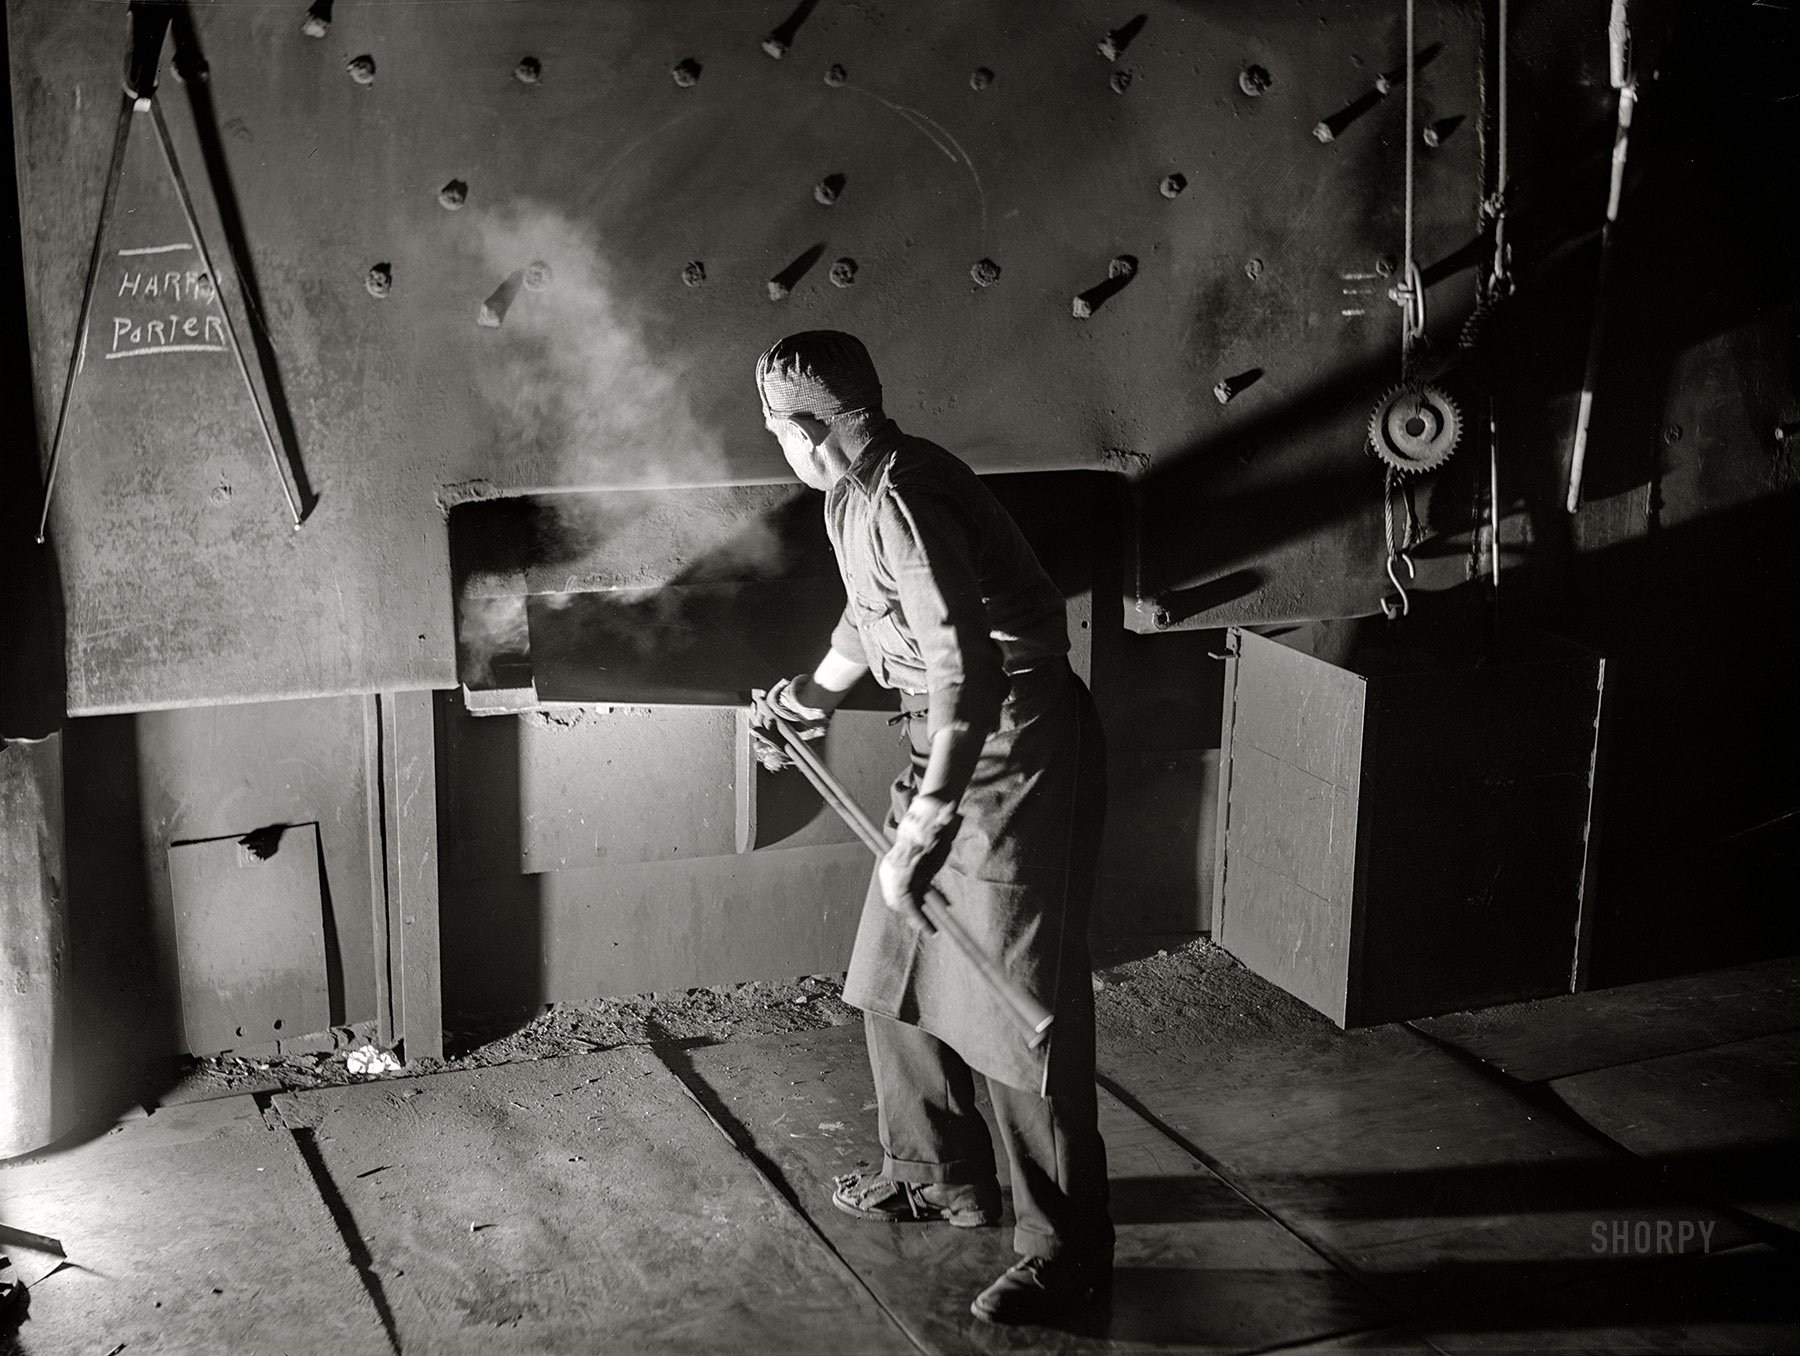 January 1941. "Worker at furnace in Washington Tinplate Company in Washington, Pennsylvania." Photo by Jack Delano for the Farm Security Administration. View full size.